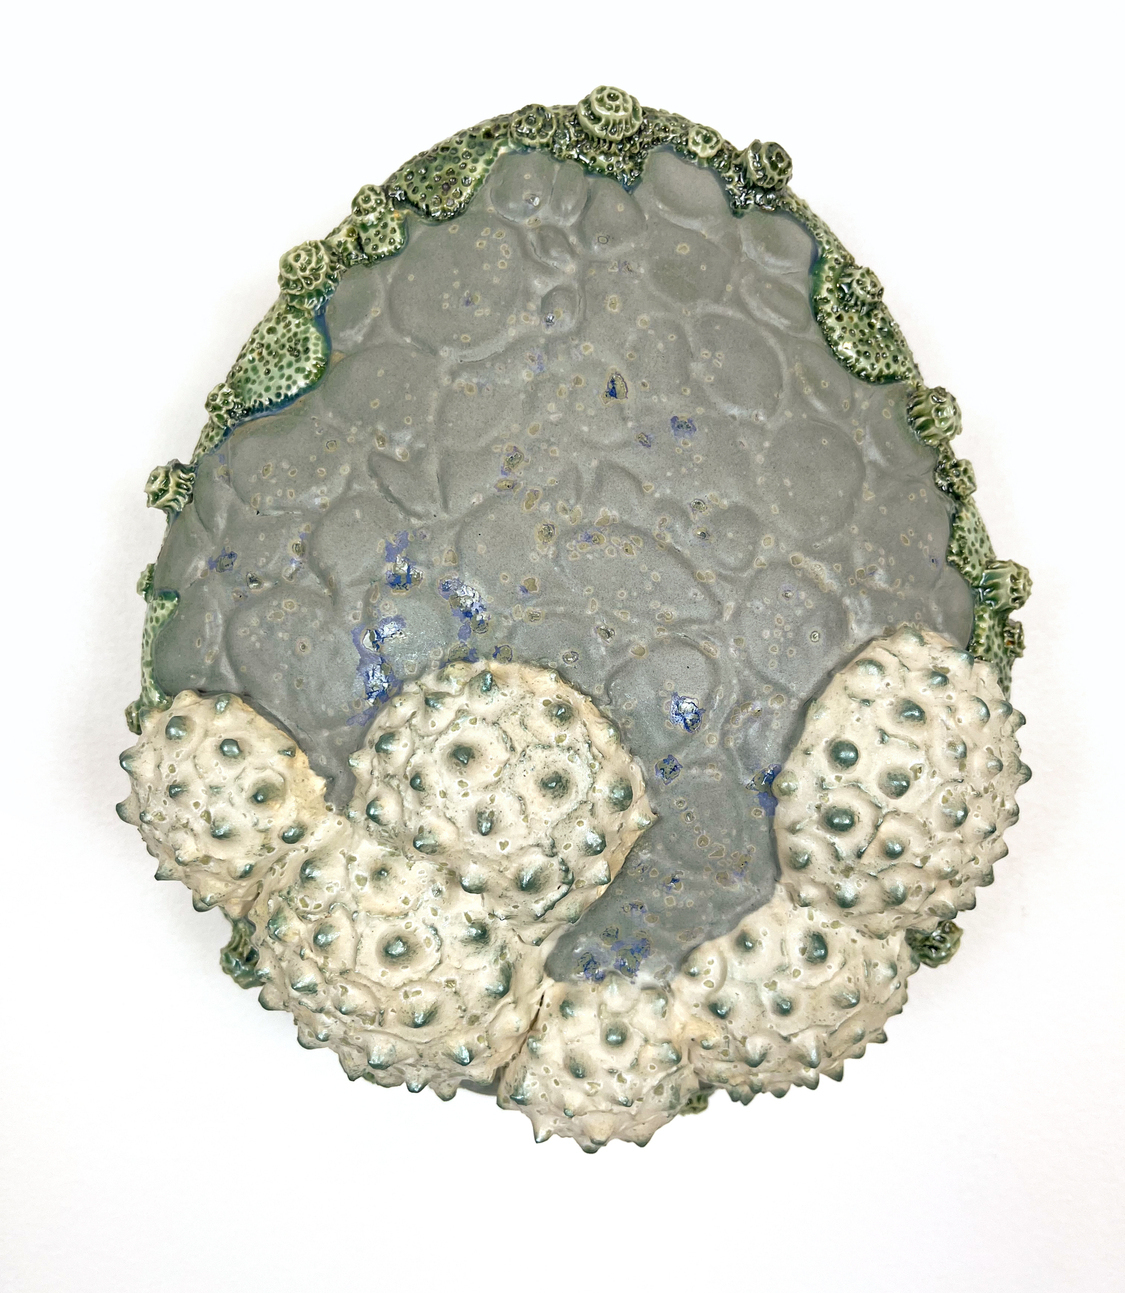 Detailed ceramic wall sculpture depicting the cellular structure of an algae specie as seen through a micrograph, with an emphasis on organic forms, intricate patterns and textures. 